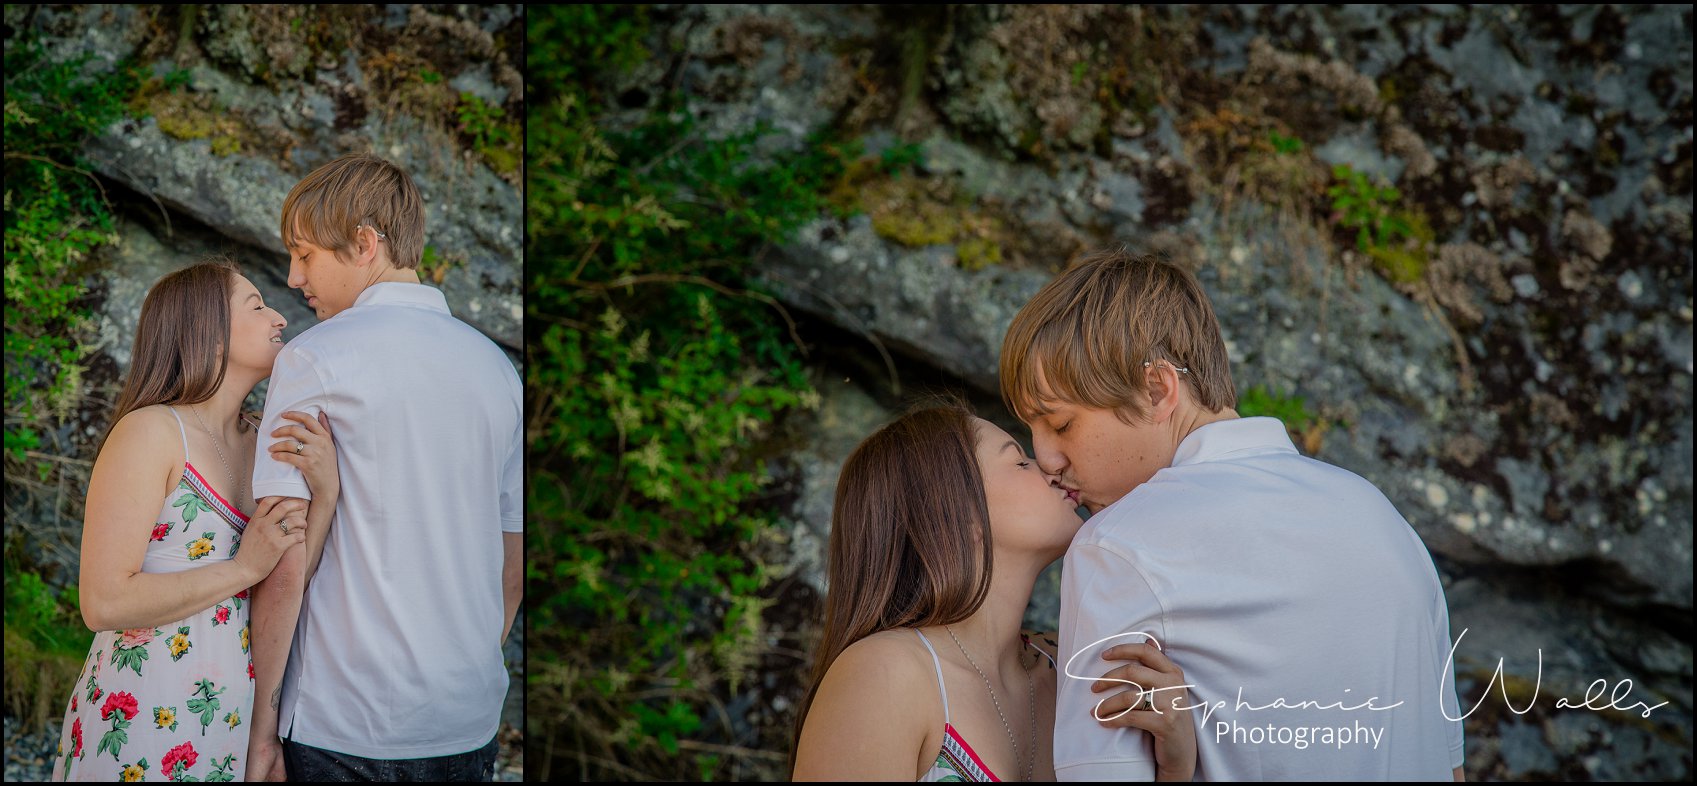 Nataly Marty052 IN A GALAXY FAR FAR AWAY | NATALY & MARTY | DECEPTION PASS ENGAGEMENT SESSION